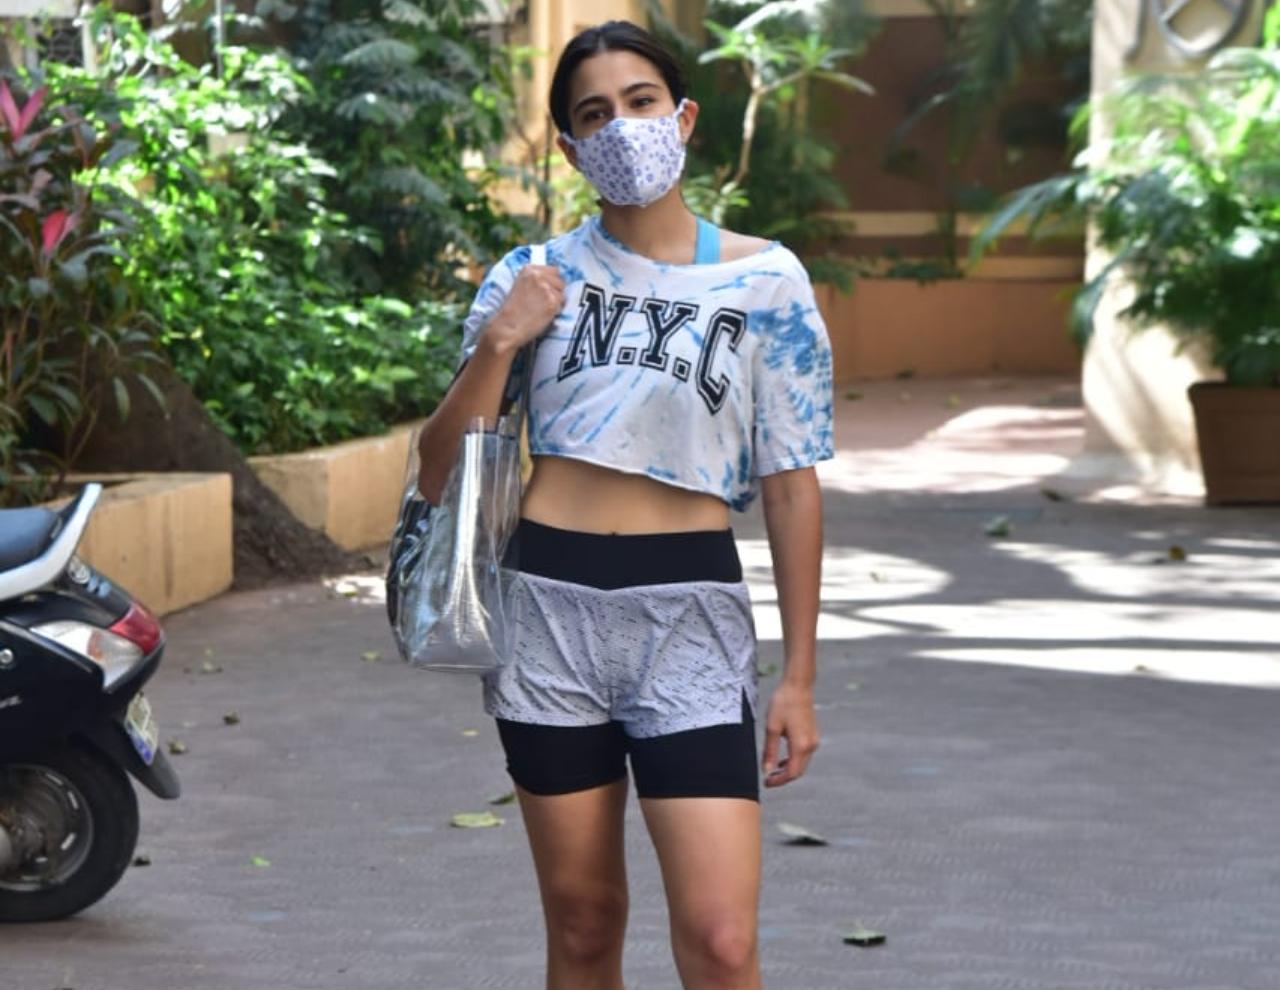 Sara Ali Khan looked chic in her white crop top and grey shorts as she was snapped outside her gym in Bandra, Mumbai. She opted for a white designer mask to prevent the spread of COVID-19. (All pictures: Yogen Shah).